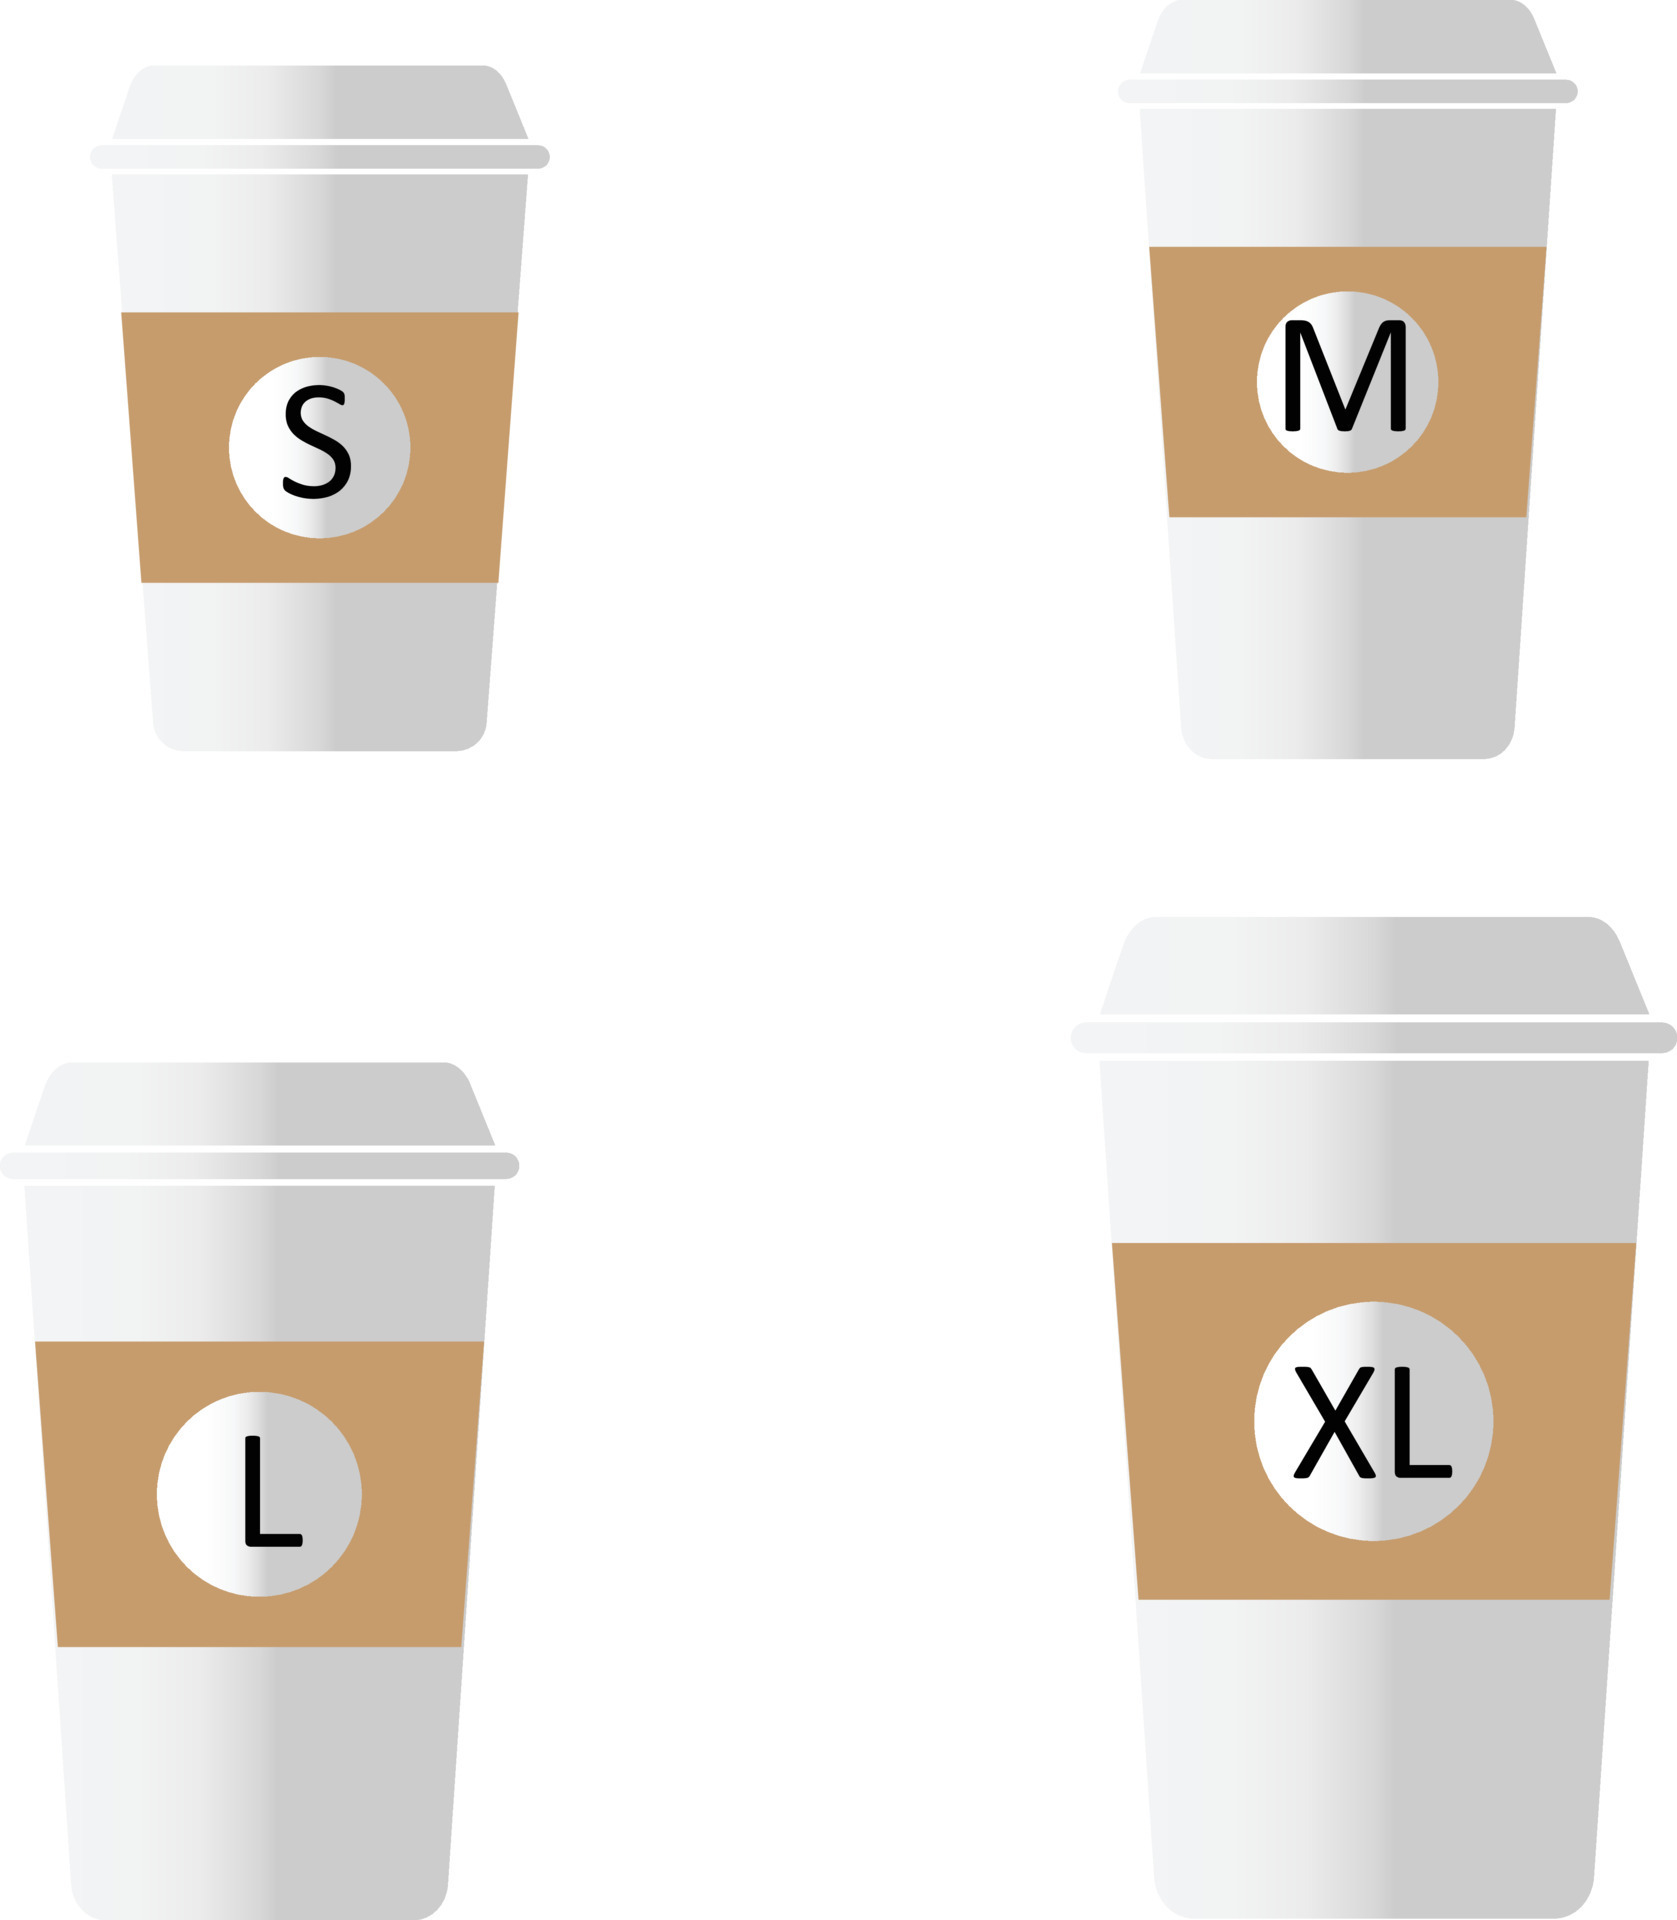 coffee to go different sizes sign. flat style. Coffee cup size S M L XL  icons on white background. take-away hot cup sizes symbol. different size -  small, medium, large and extra